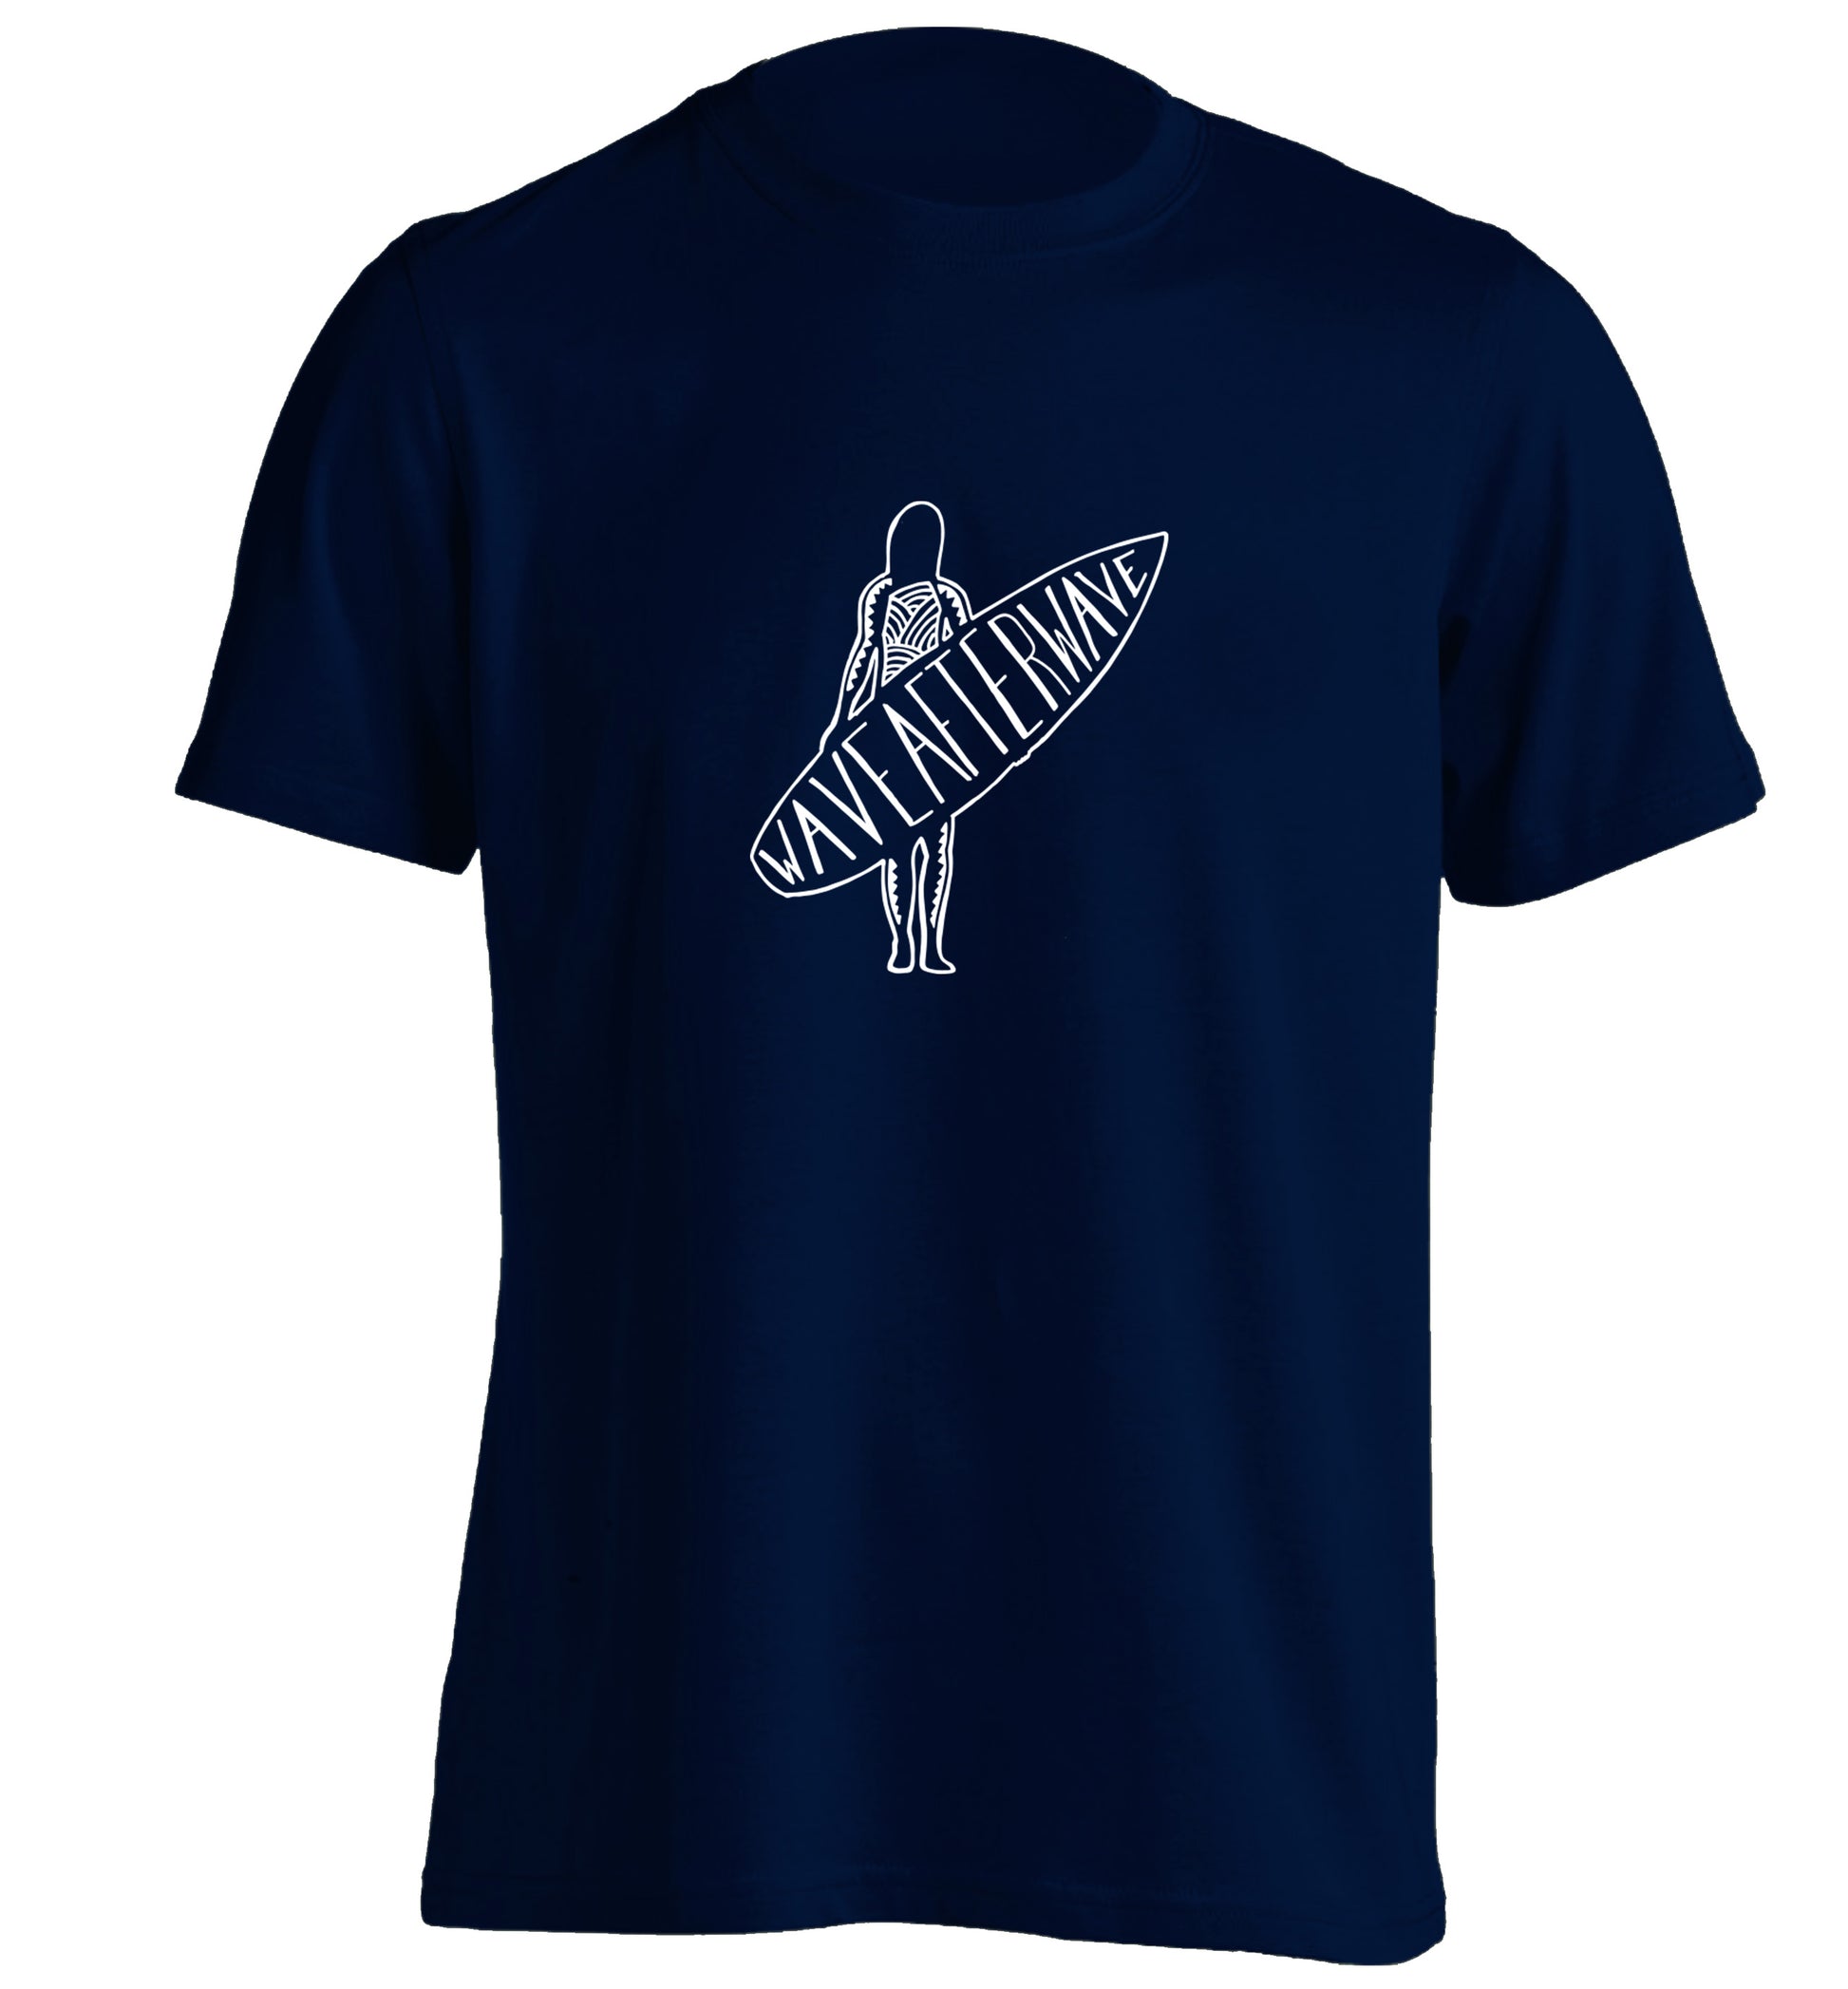 Wave after wave adults unisex navy Tshirt 2XL